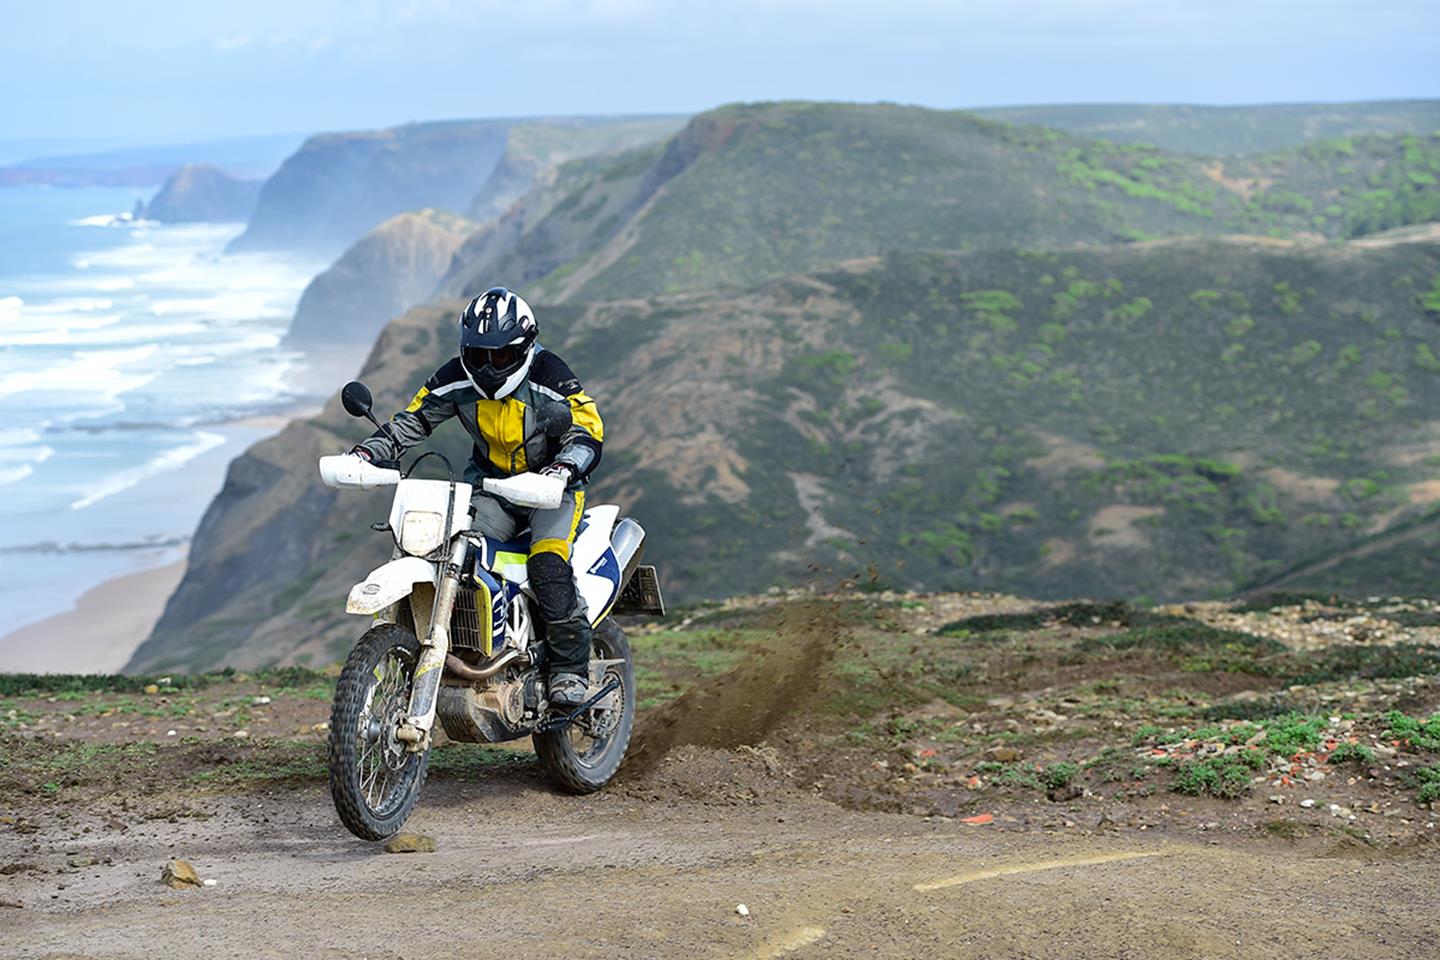 Husqvarna 701 Enduro is a seriously capable bike when it comes to tackling the rough stuff